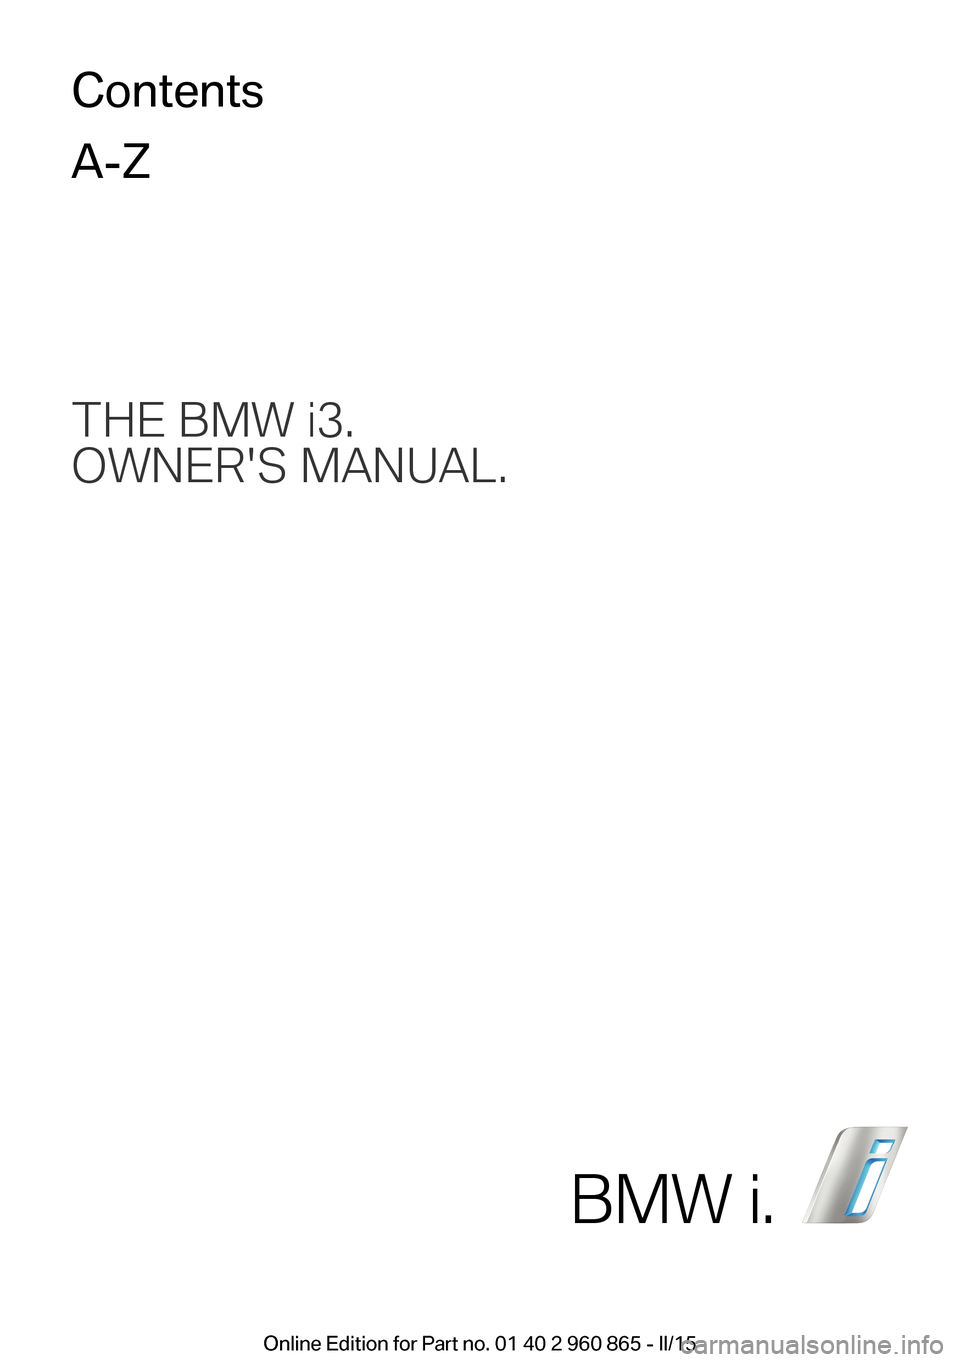 BMW I3 2015 I01 Owners Manual THE BMW i3.
OWNERS MANUAL.ContentsA-Z
BMW i.
Online Edition for Part no. 01 40 2 960 865 - II/15 